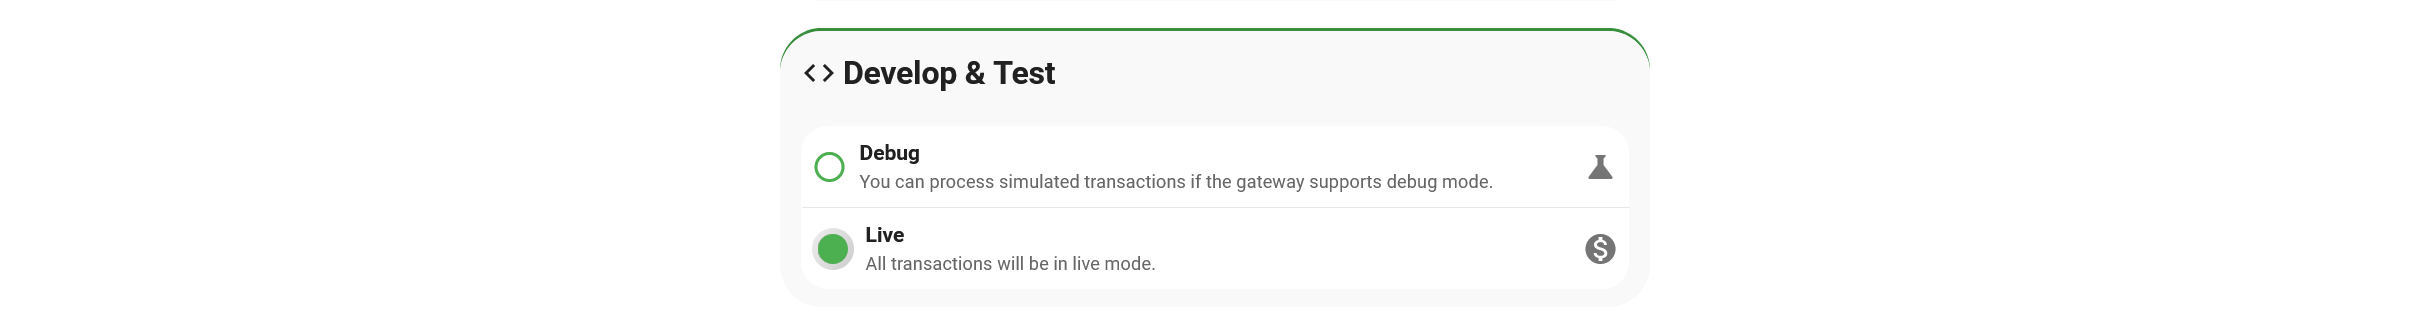 Payment gateway in live mode